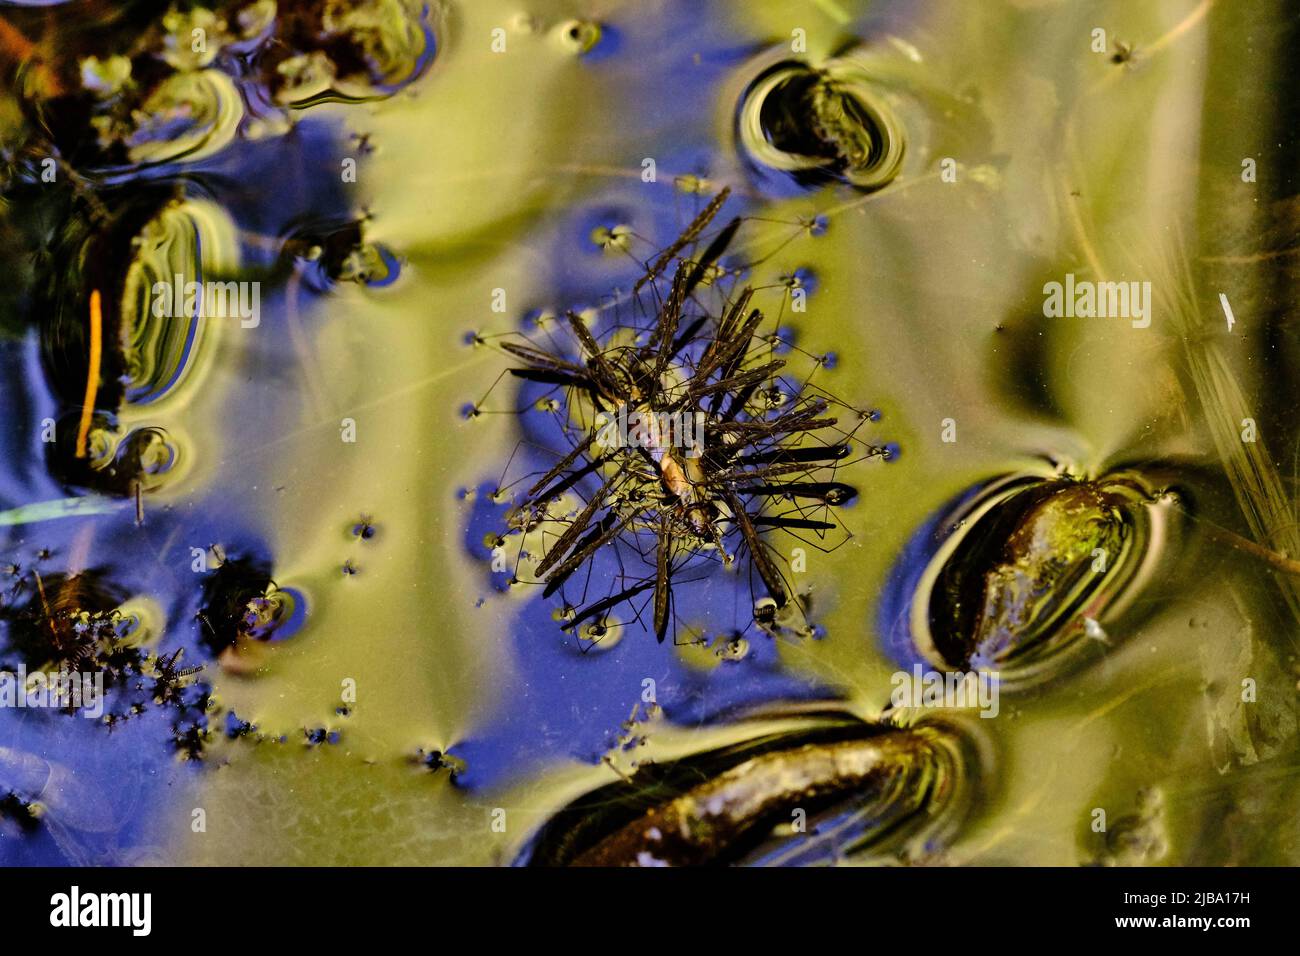 06 May 2022, Lower Saxony, Brunswick: Water striders (Gerris lacustris) suck out a drowned earwig on the surface of a garden pond. Photo: Stefan Jaitner/dpa Stock Photo